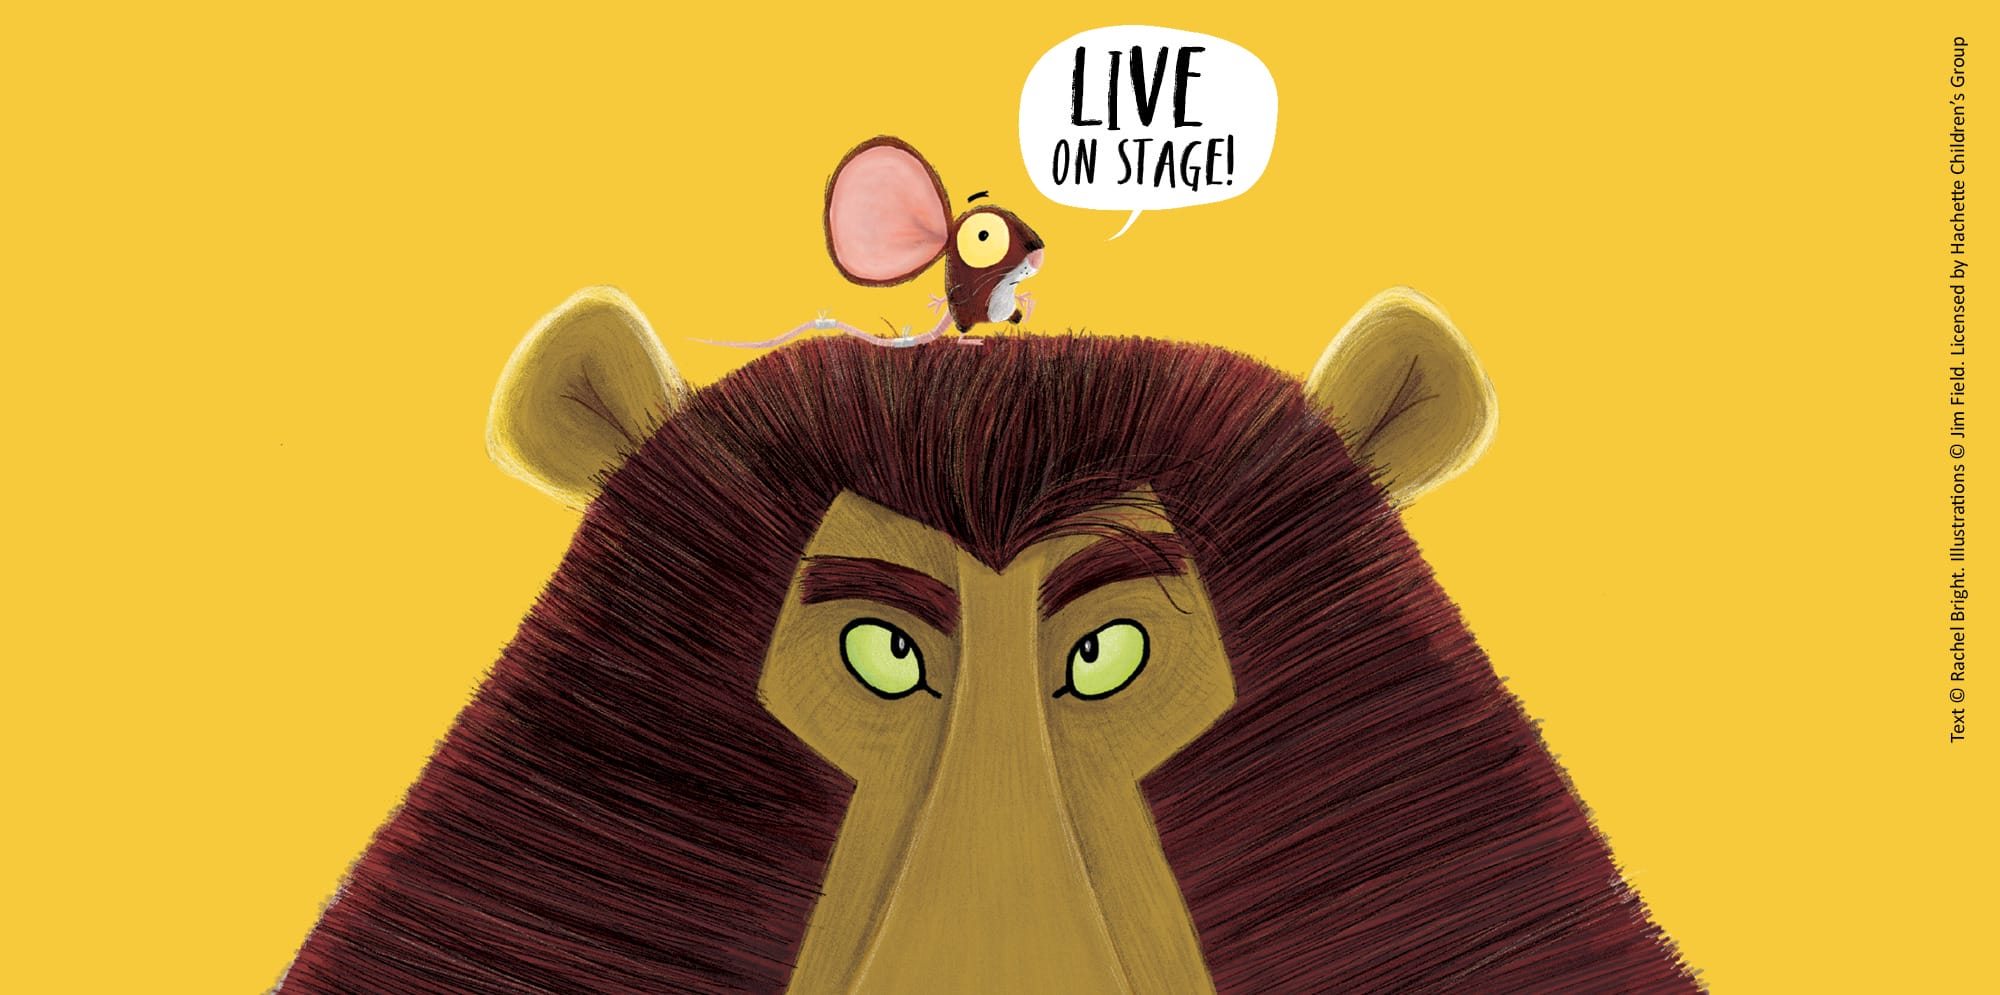 An illustrated lion stares upwards at the small mouse perched on top of his impressive mane. The background is a warm yellow. The mouse's speech bubble reads 'Live on Stage!'